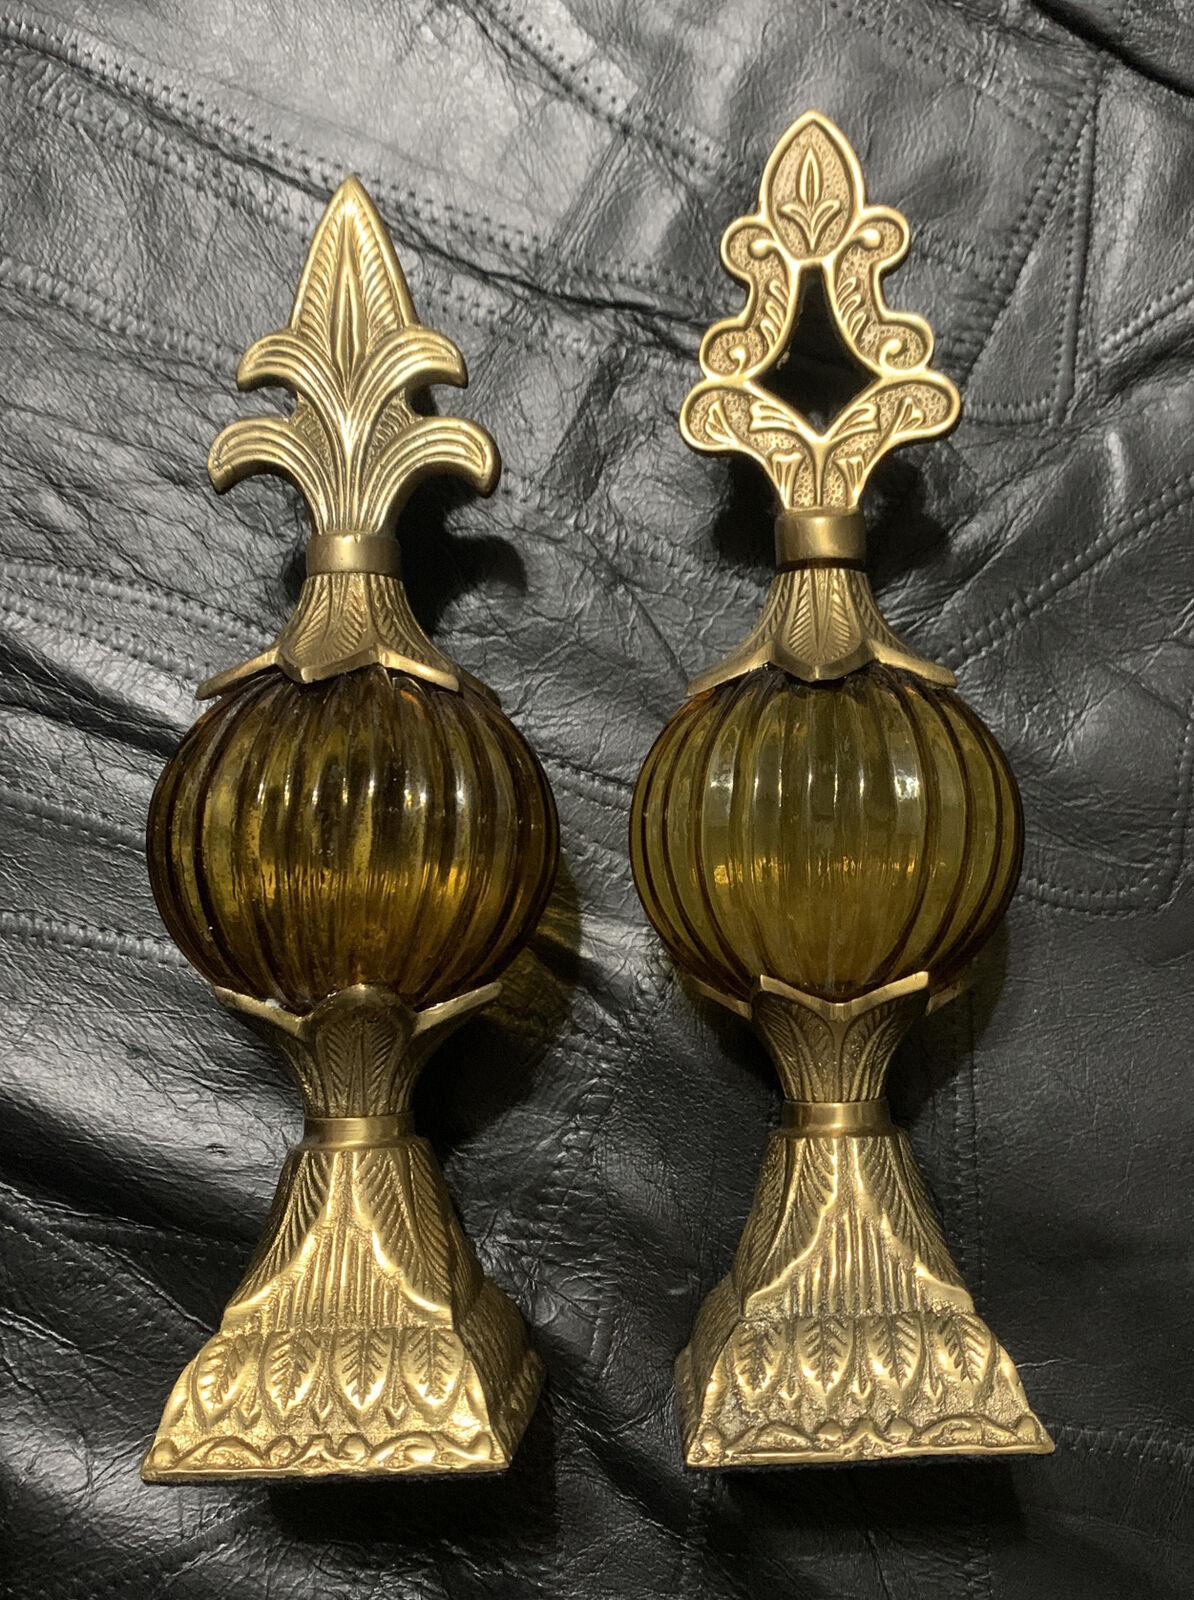 PAIR OF VINTAGE SOLID BRASS & AMBER YELLOW GLASS ART DECOR. India Made 9.5” H